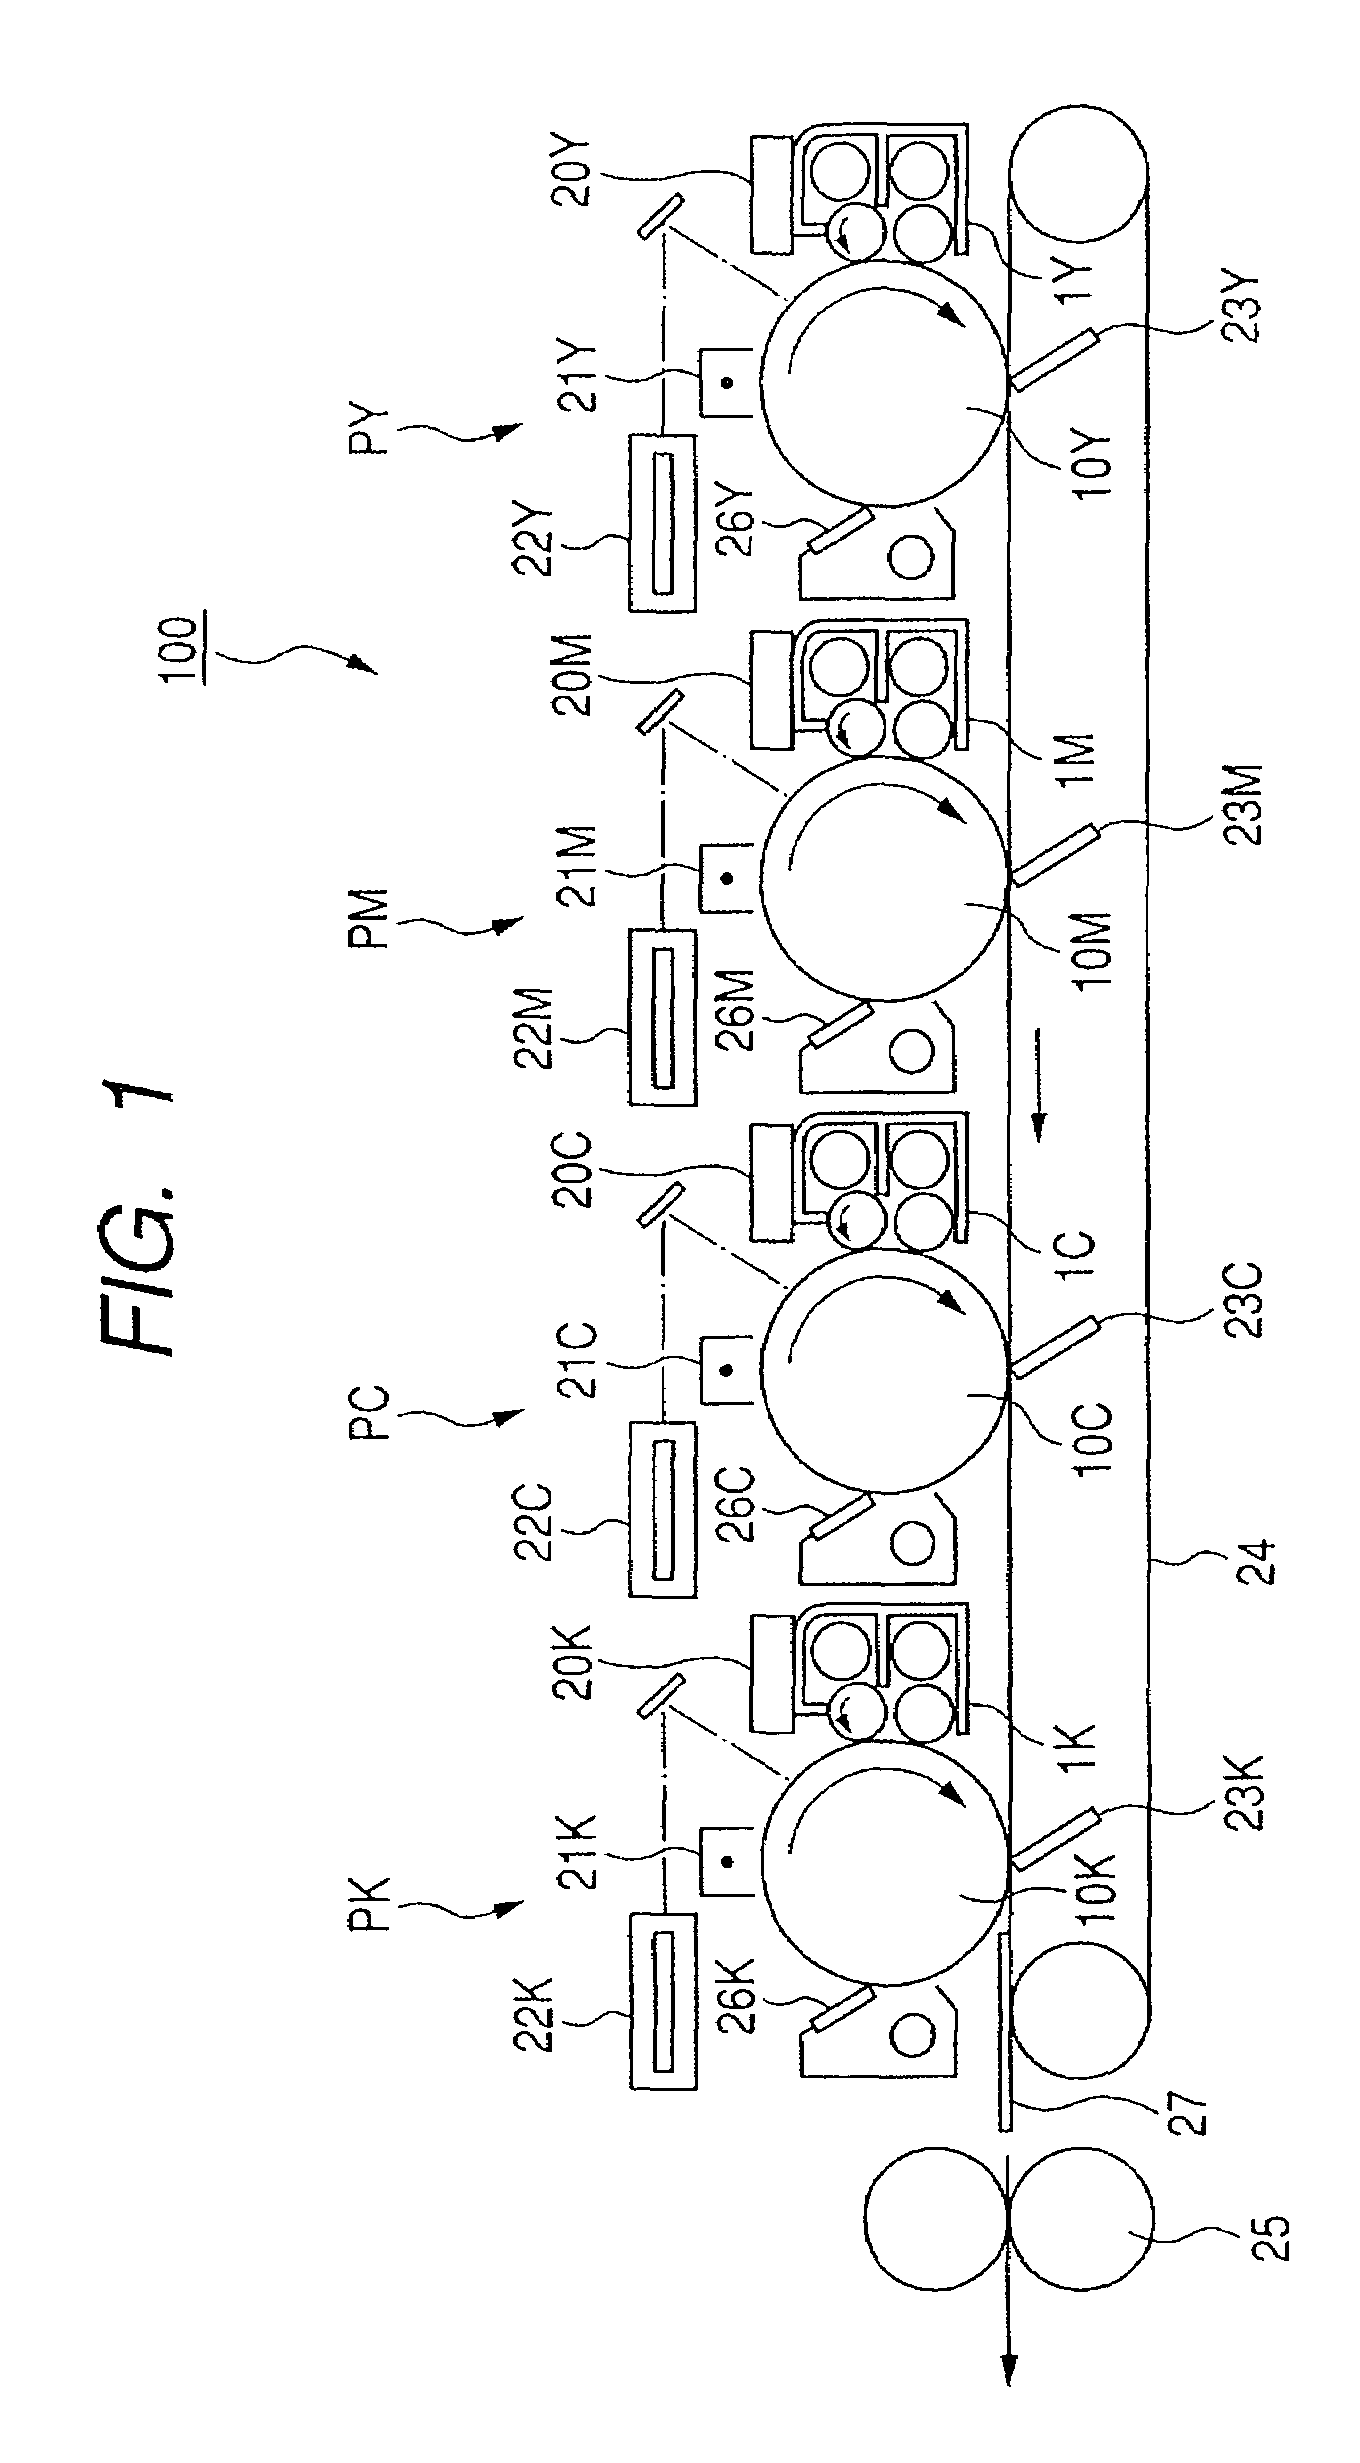 Developing apparatus featuring multiple magnetic rollers for developing a latent image multiple times